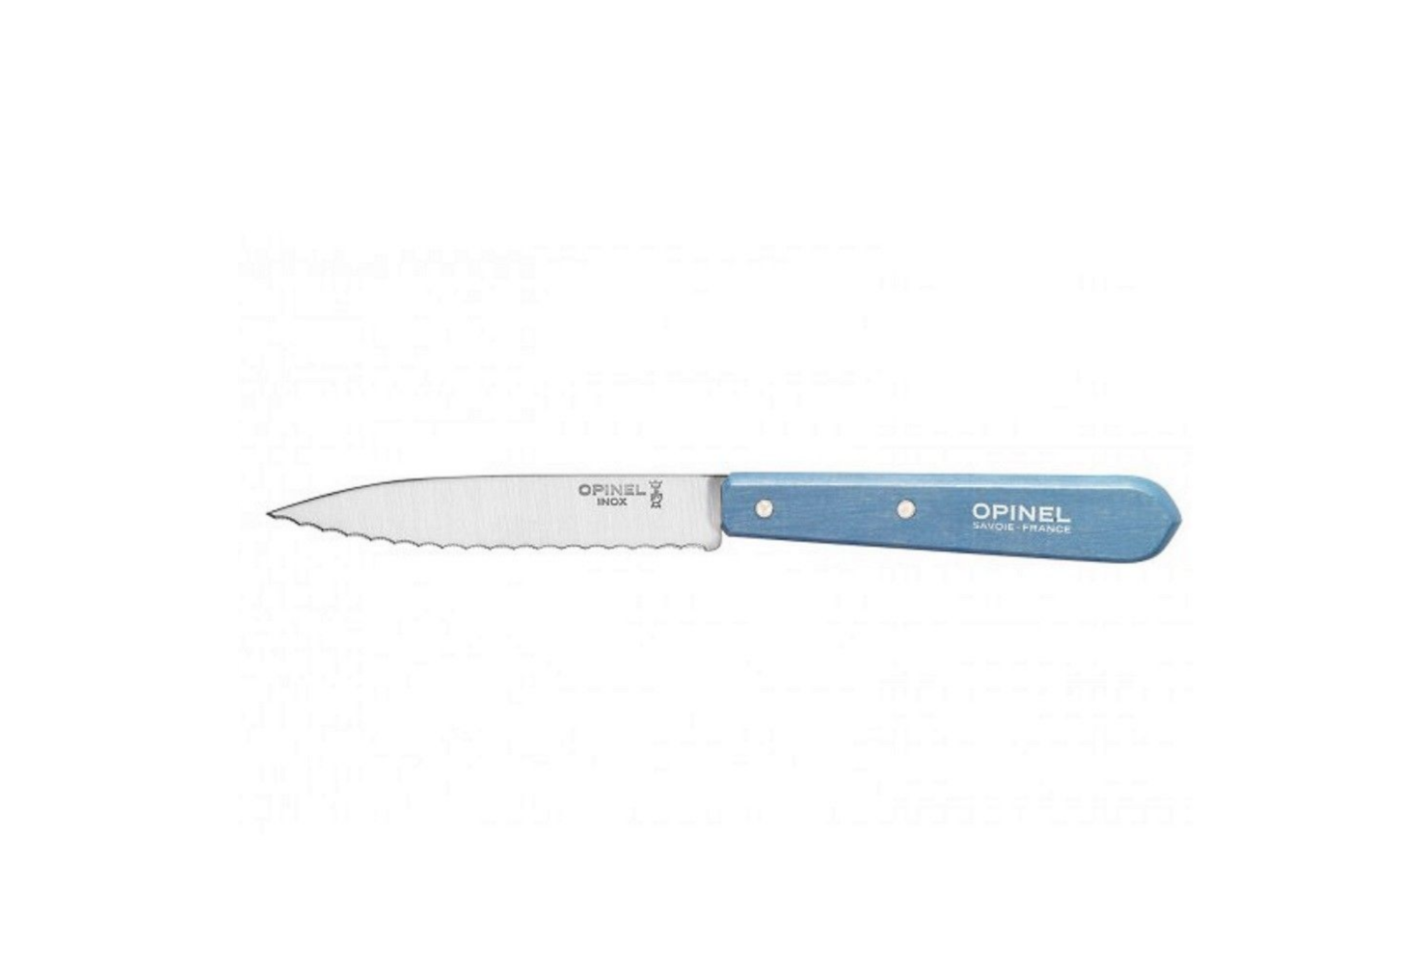 OPINEL 113 COUTEAU CRANTE GREEN INOX HOOD COUPE DECOUPE CUISINE 3123840019227 HOME COOKING KITCHEN NATURE INOX HOOD COMASOUND KARTEL CSK ONLINE